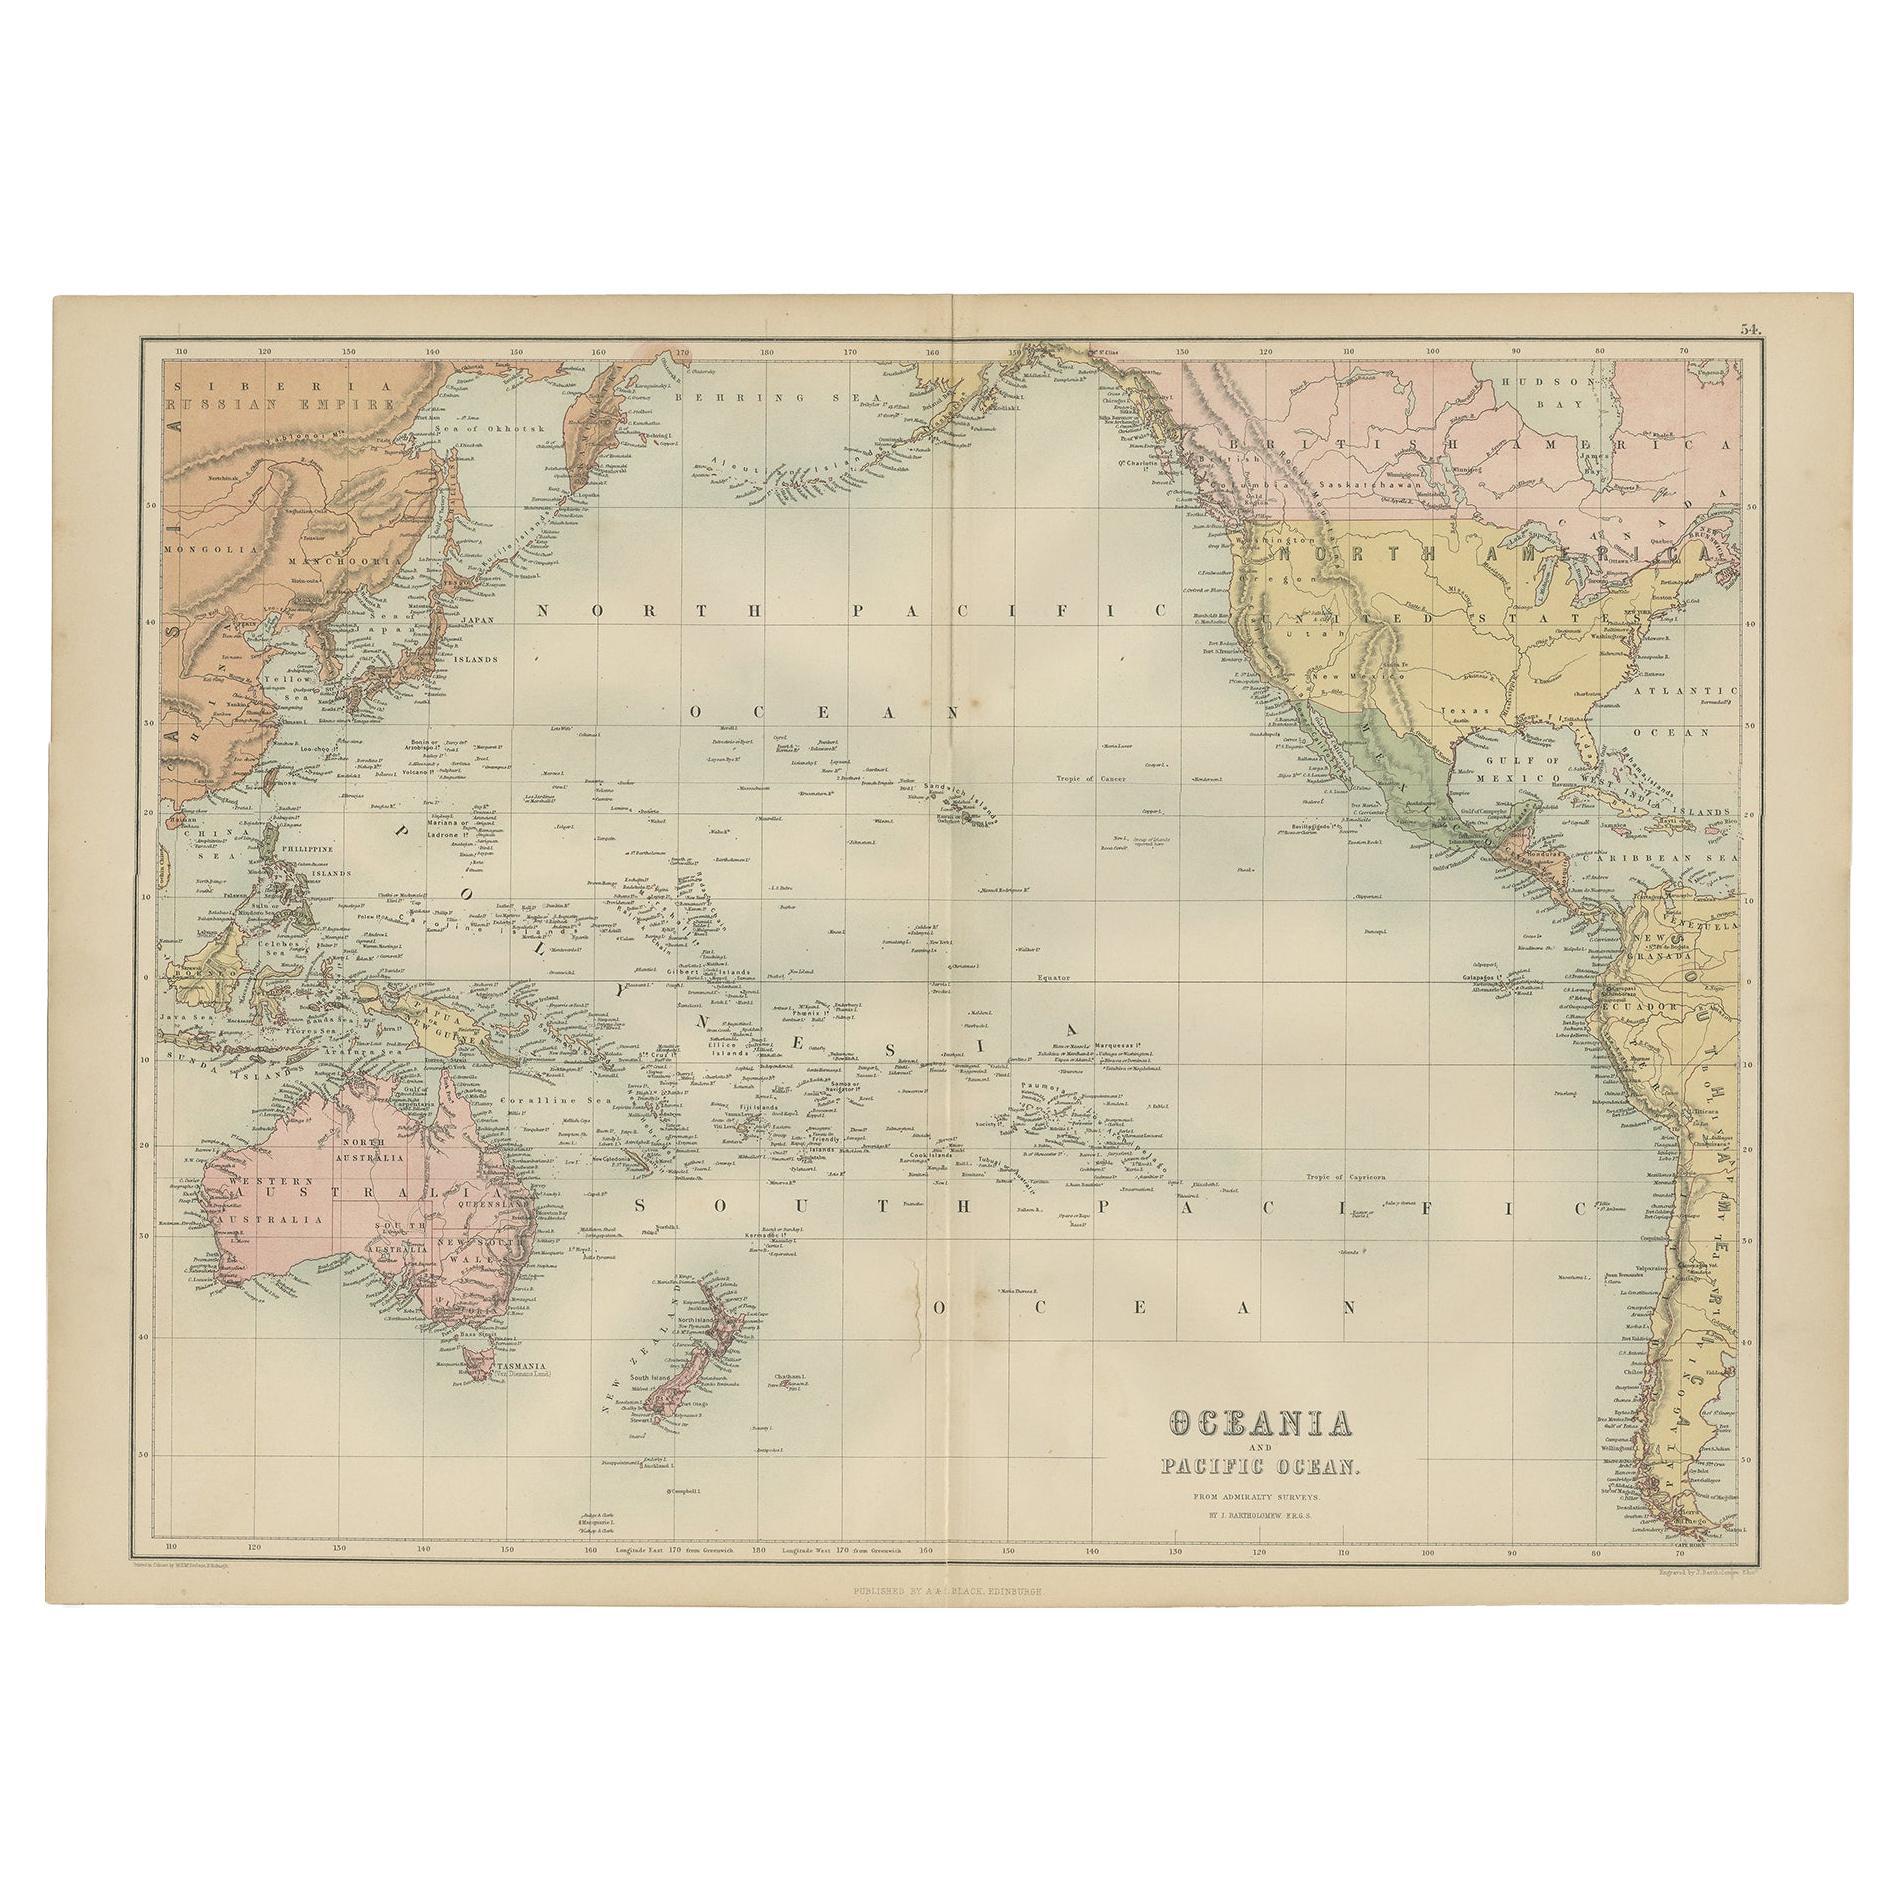 Antique Map of Oceania and the Pacific Ocean by A & C. Black, 1870